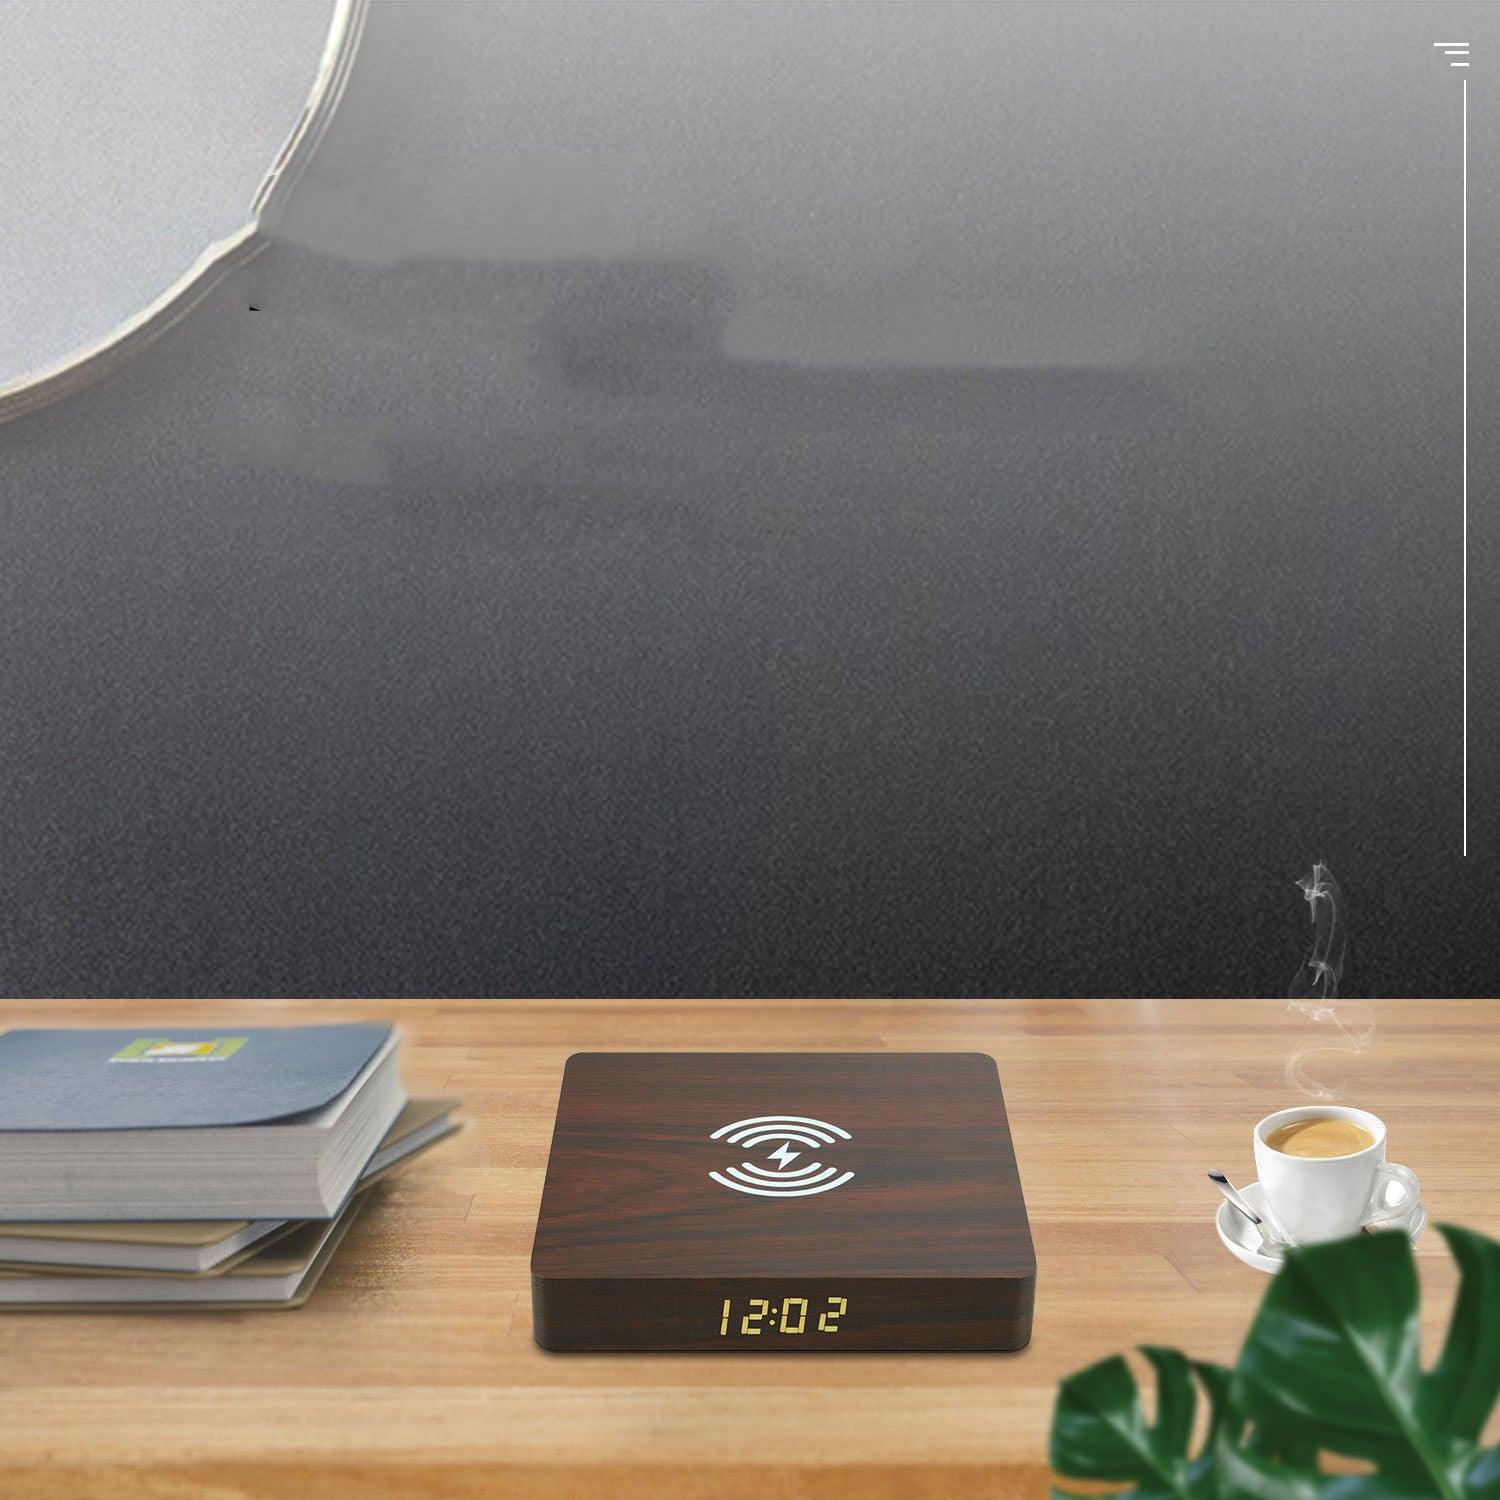 NEW Digital Wooden Clock with Wireless Charging for iPhone - BUNNY BAZAR